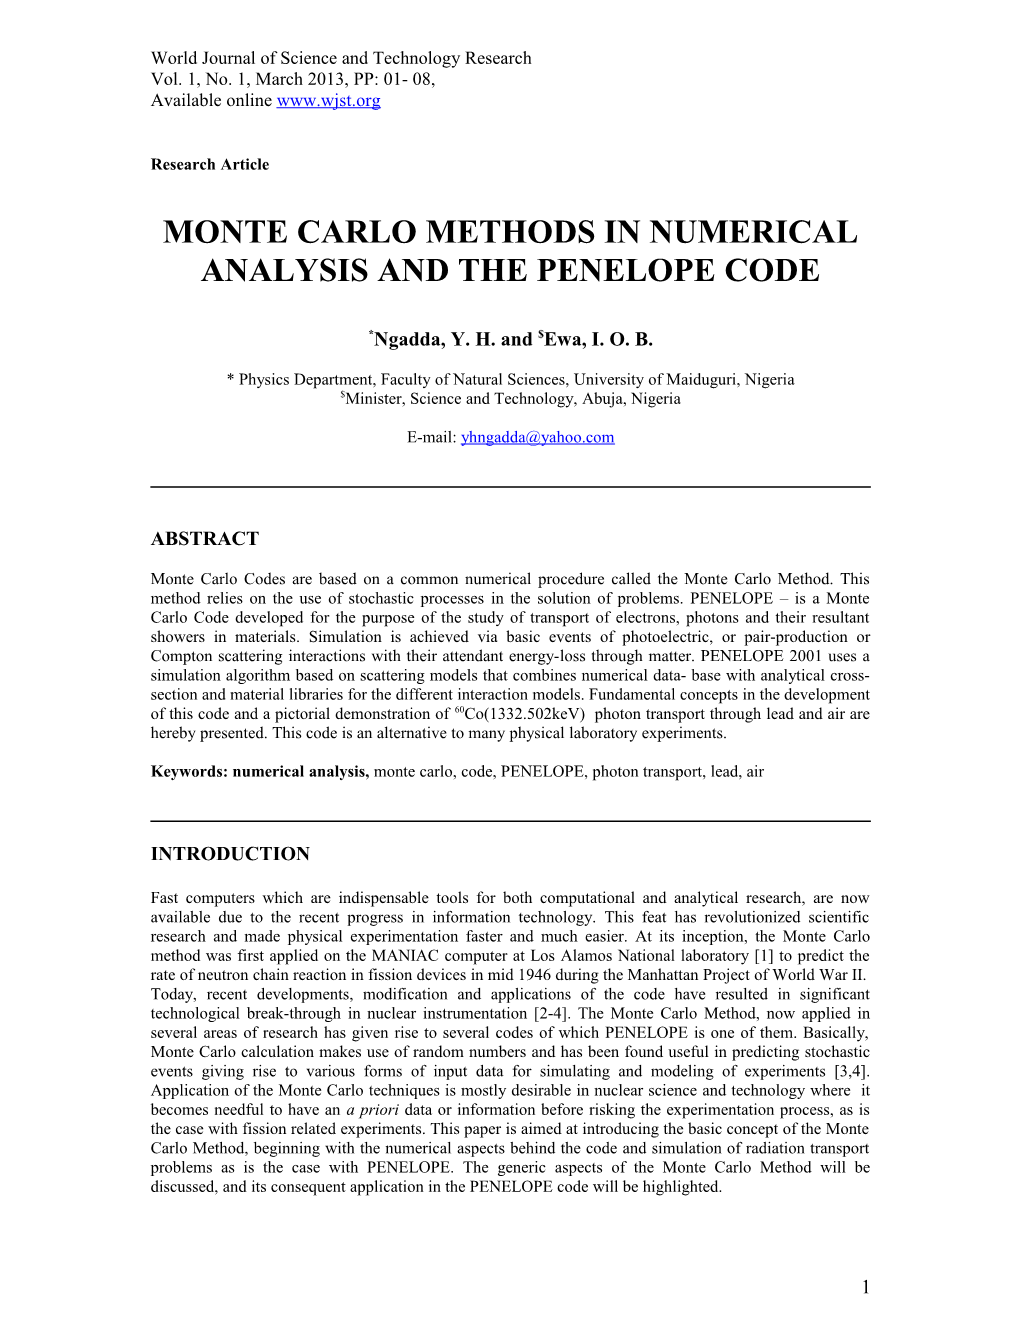 Application of Penelope in Monte Carlo Simulation of Photon Transport in a Lead and Aluminum